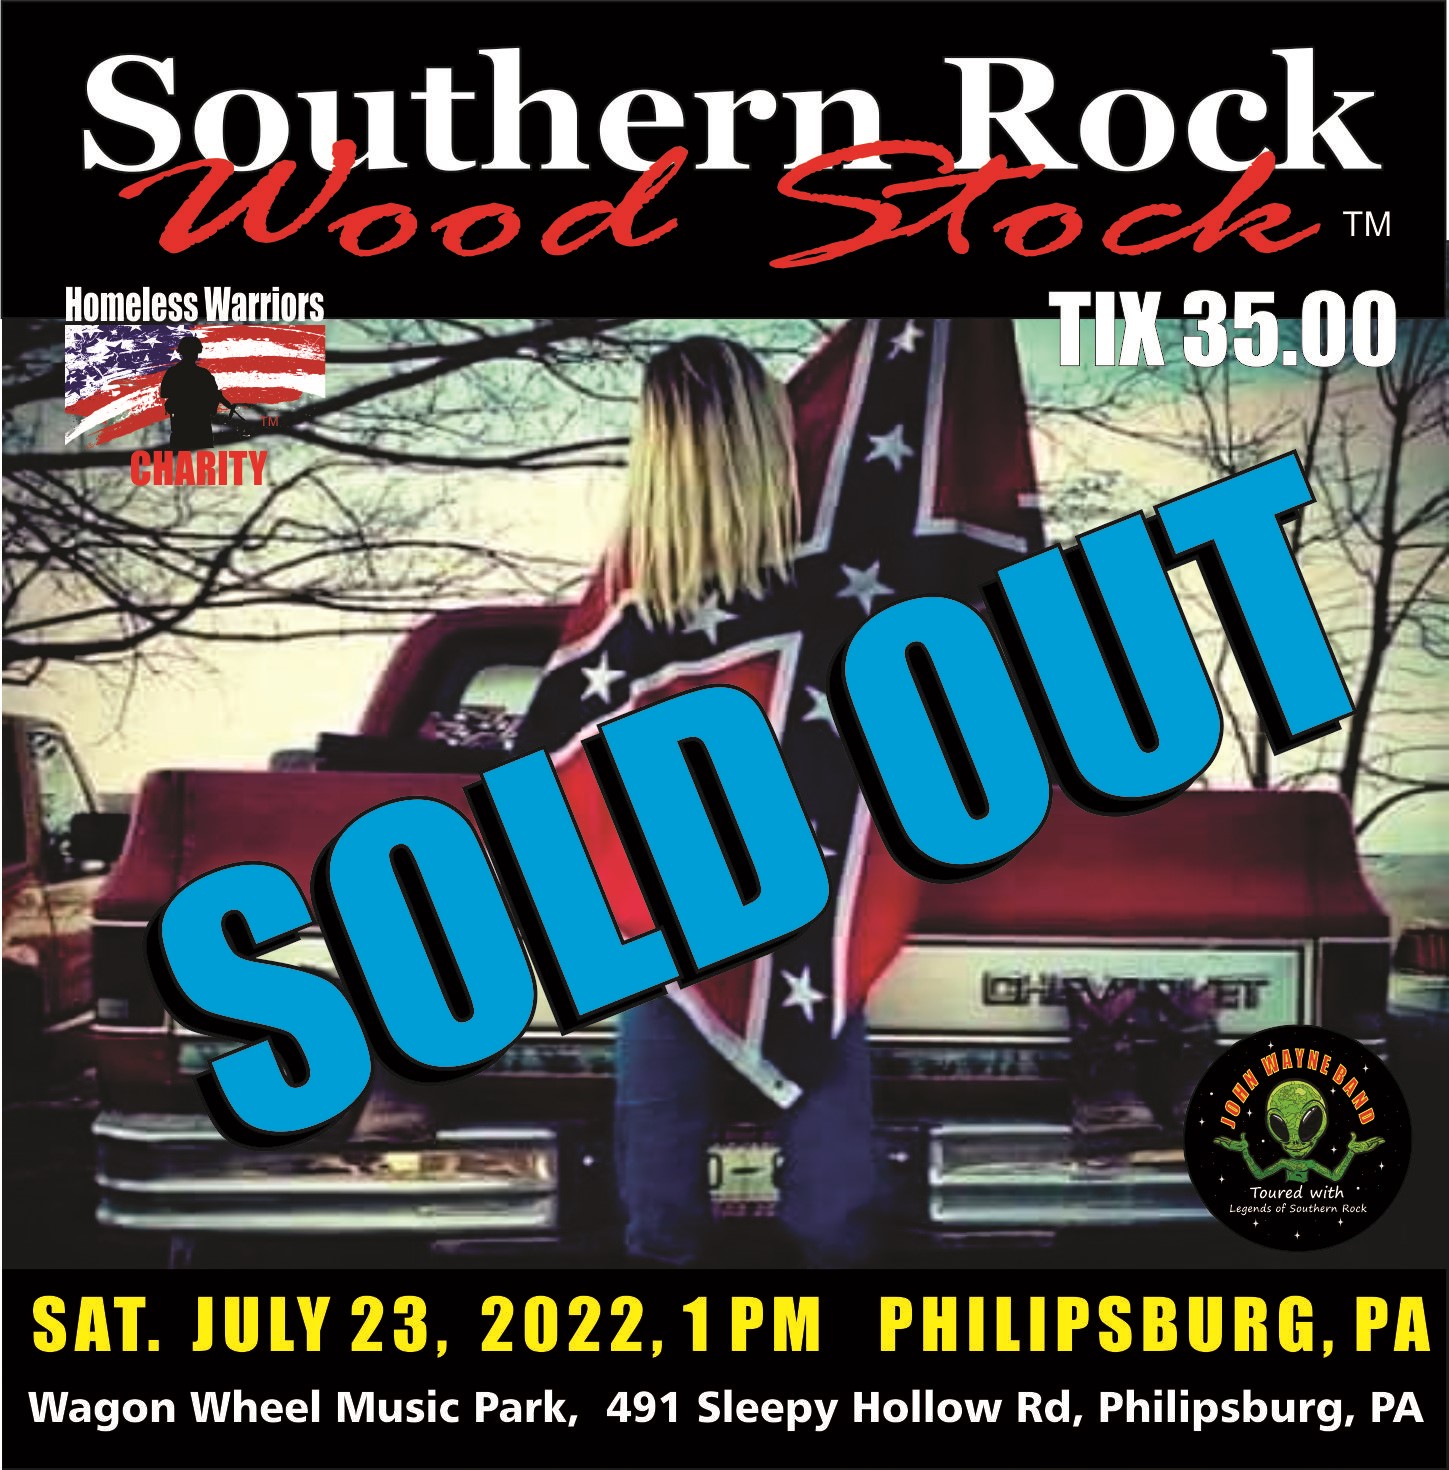 Southern Rock Wood Stock 2022 Philipsburg, PA on Jul 23, 13:00@Wagon Wheel Amphitheater - Buy tickets and Get information on www.southernrockwoodstock.com southernrockwoodstock